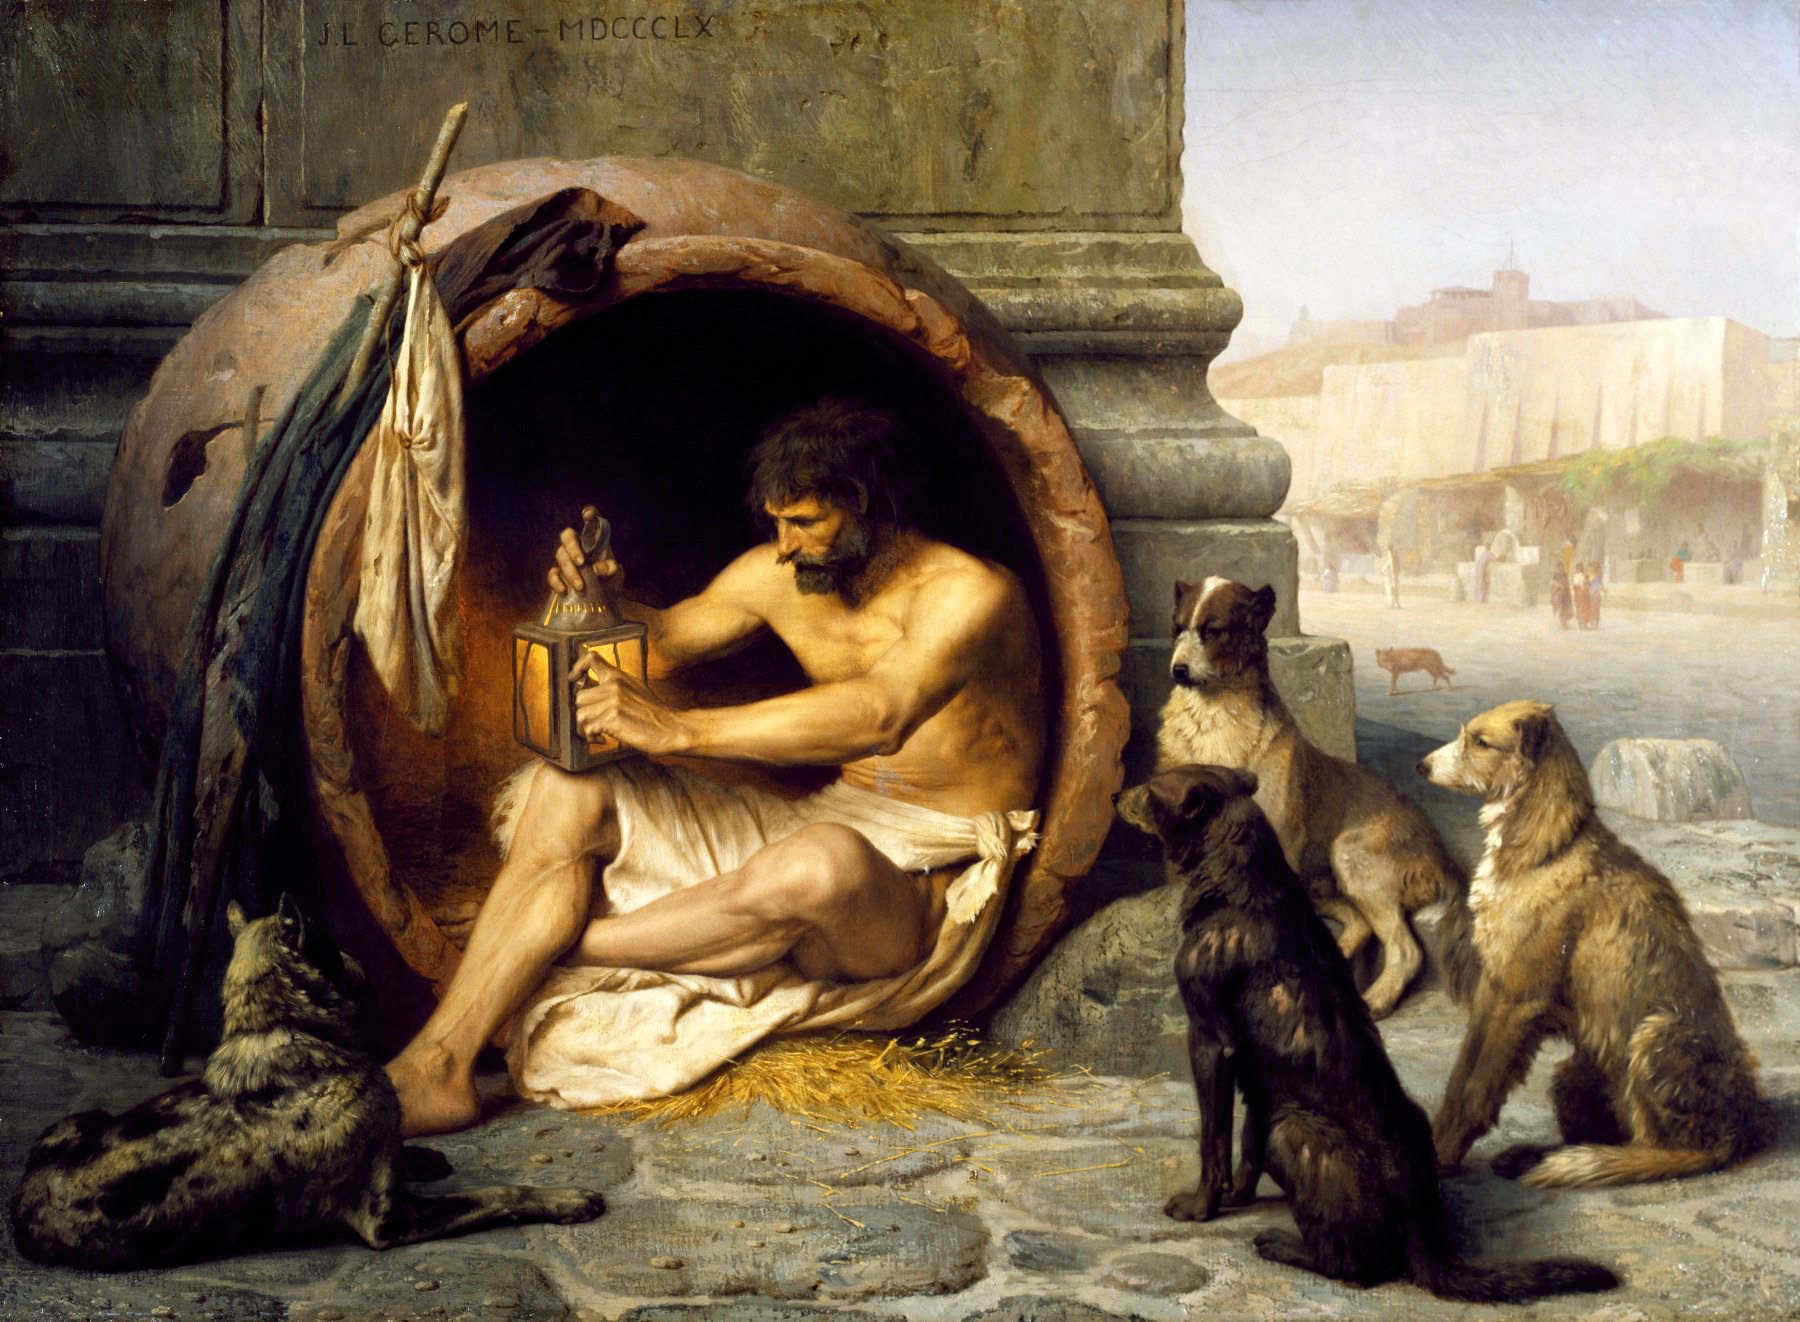 Painting of Diogenes the Cynic philosopher, seated in a large ceramic tub, holding a lantern with a contemplative expression. Around him, attentive dogs seem to be his only companions. The background reveals a sunlit ancient Greek cityscape, suggesting the philosopher's detachment from societal norms.